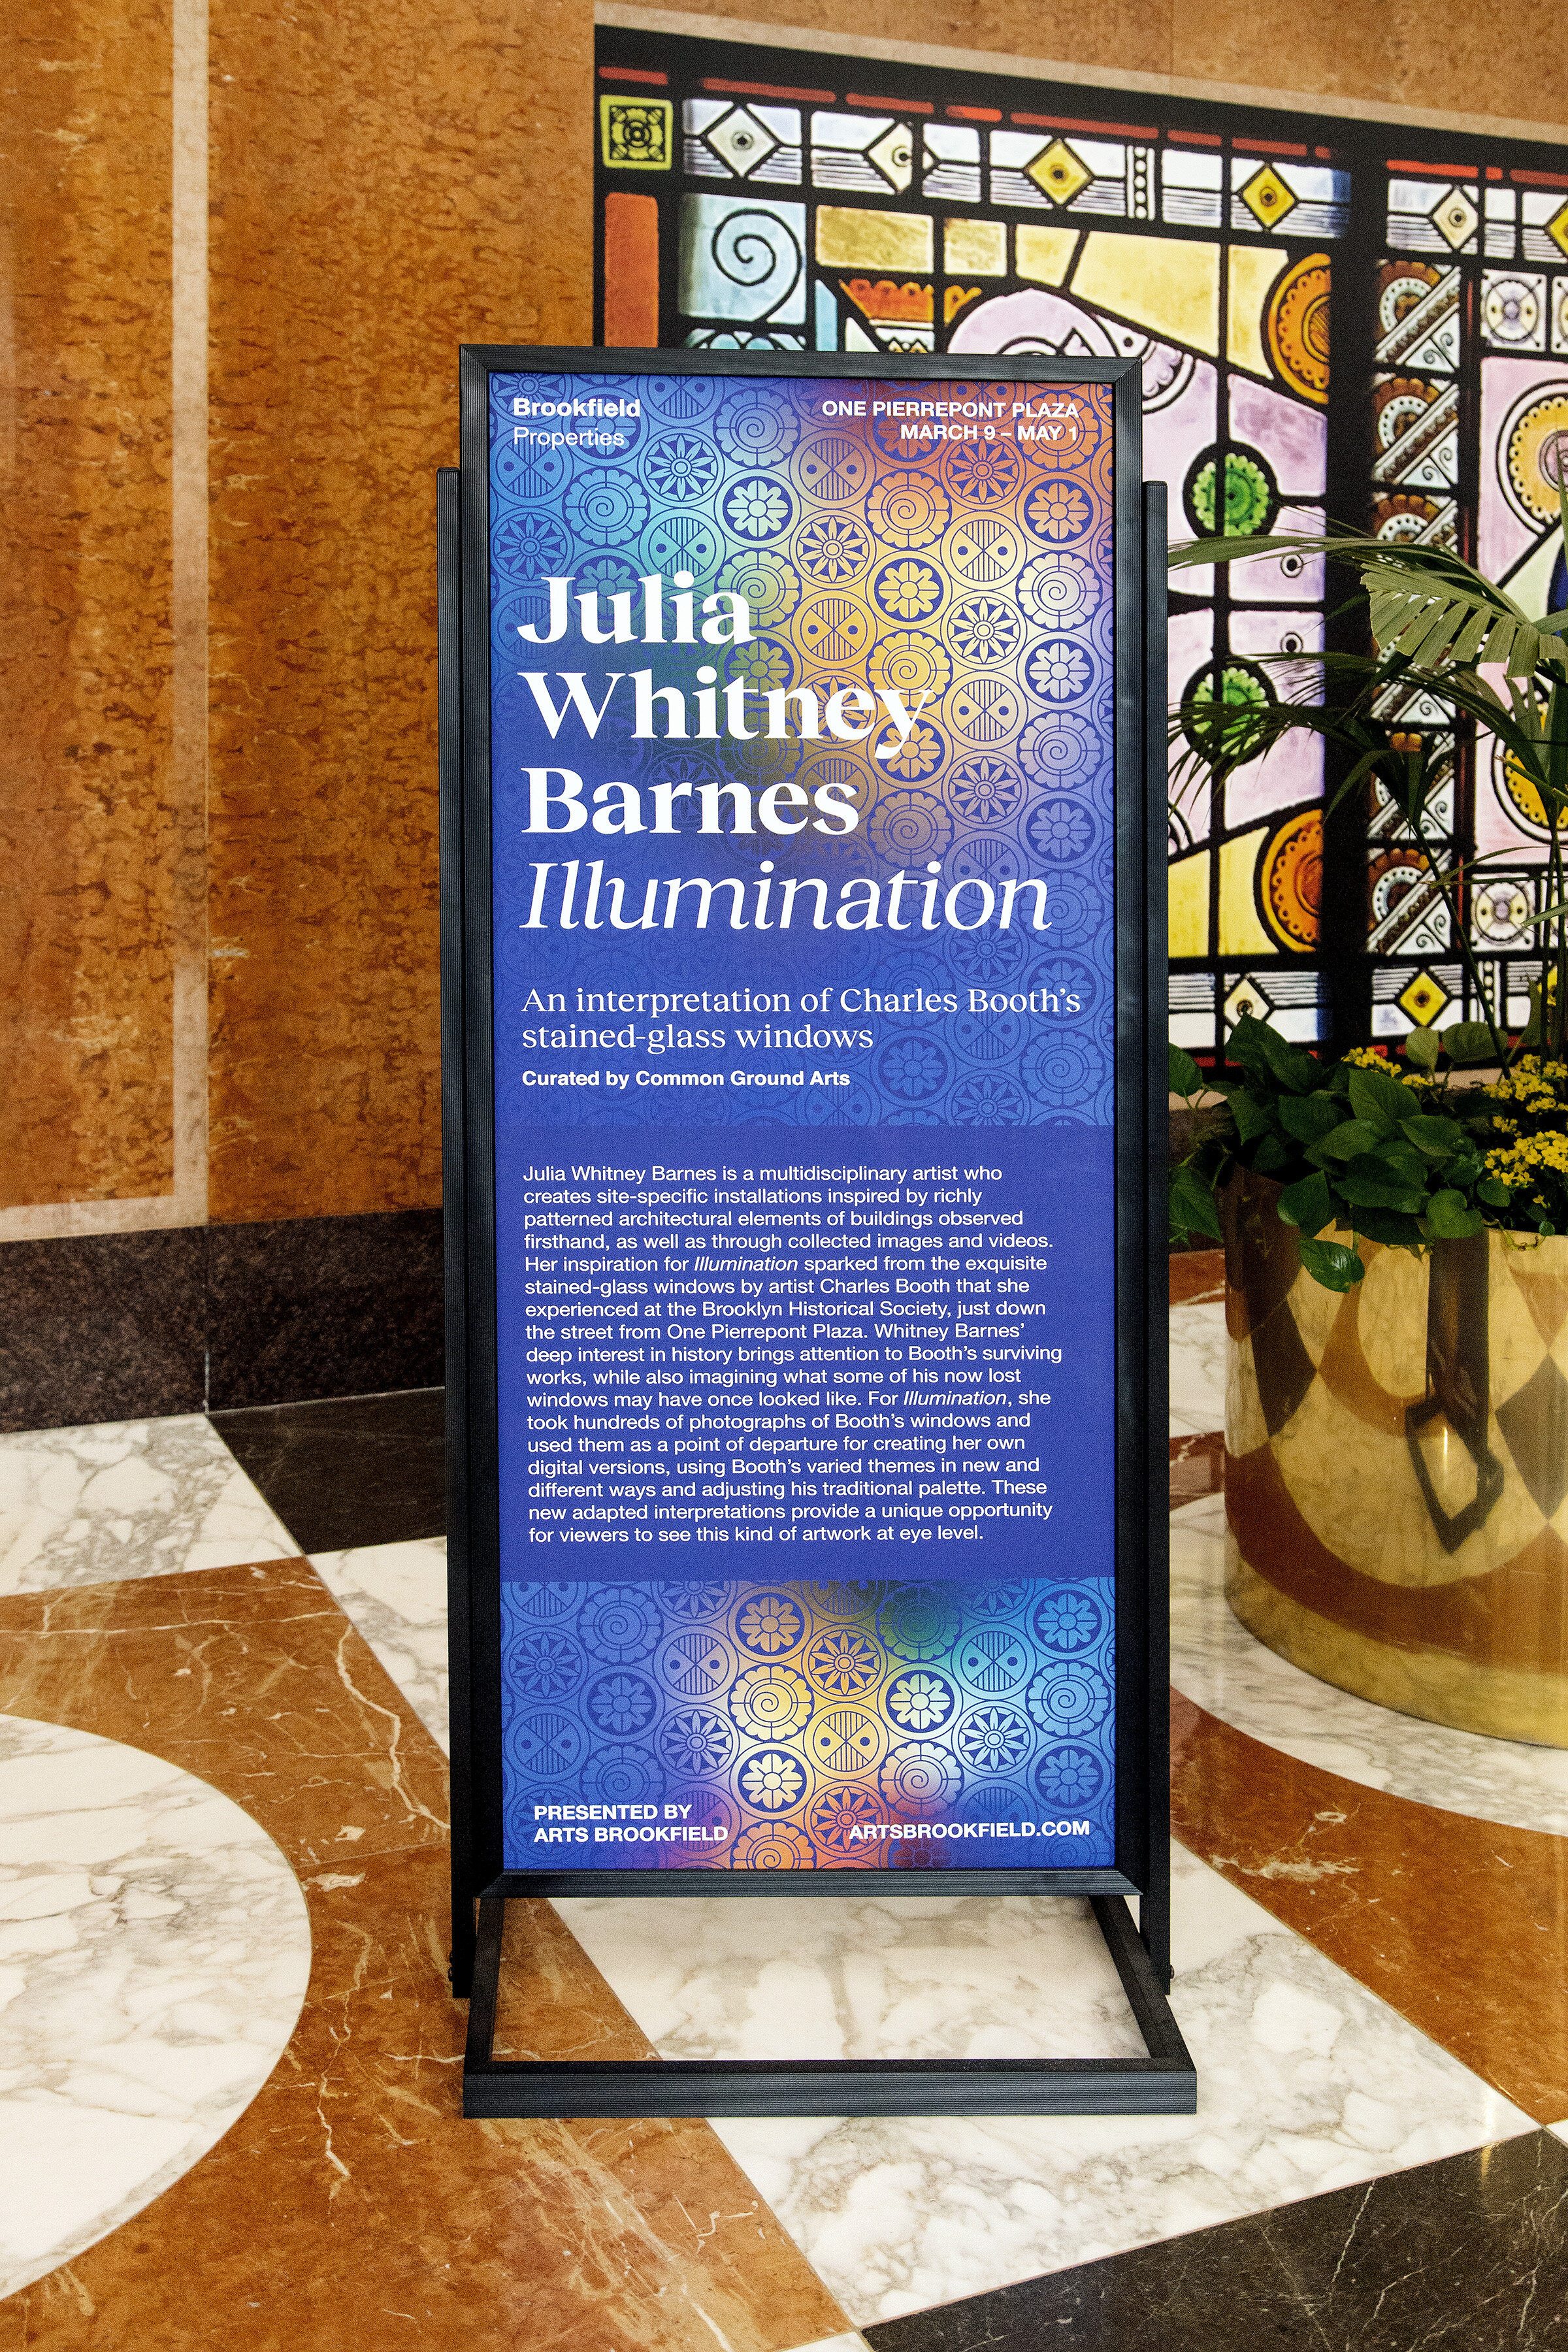 Illumination: An Interpretation of Charles Booth's Stained Glass Windows